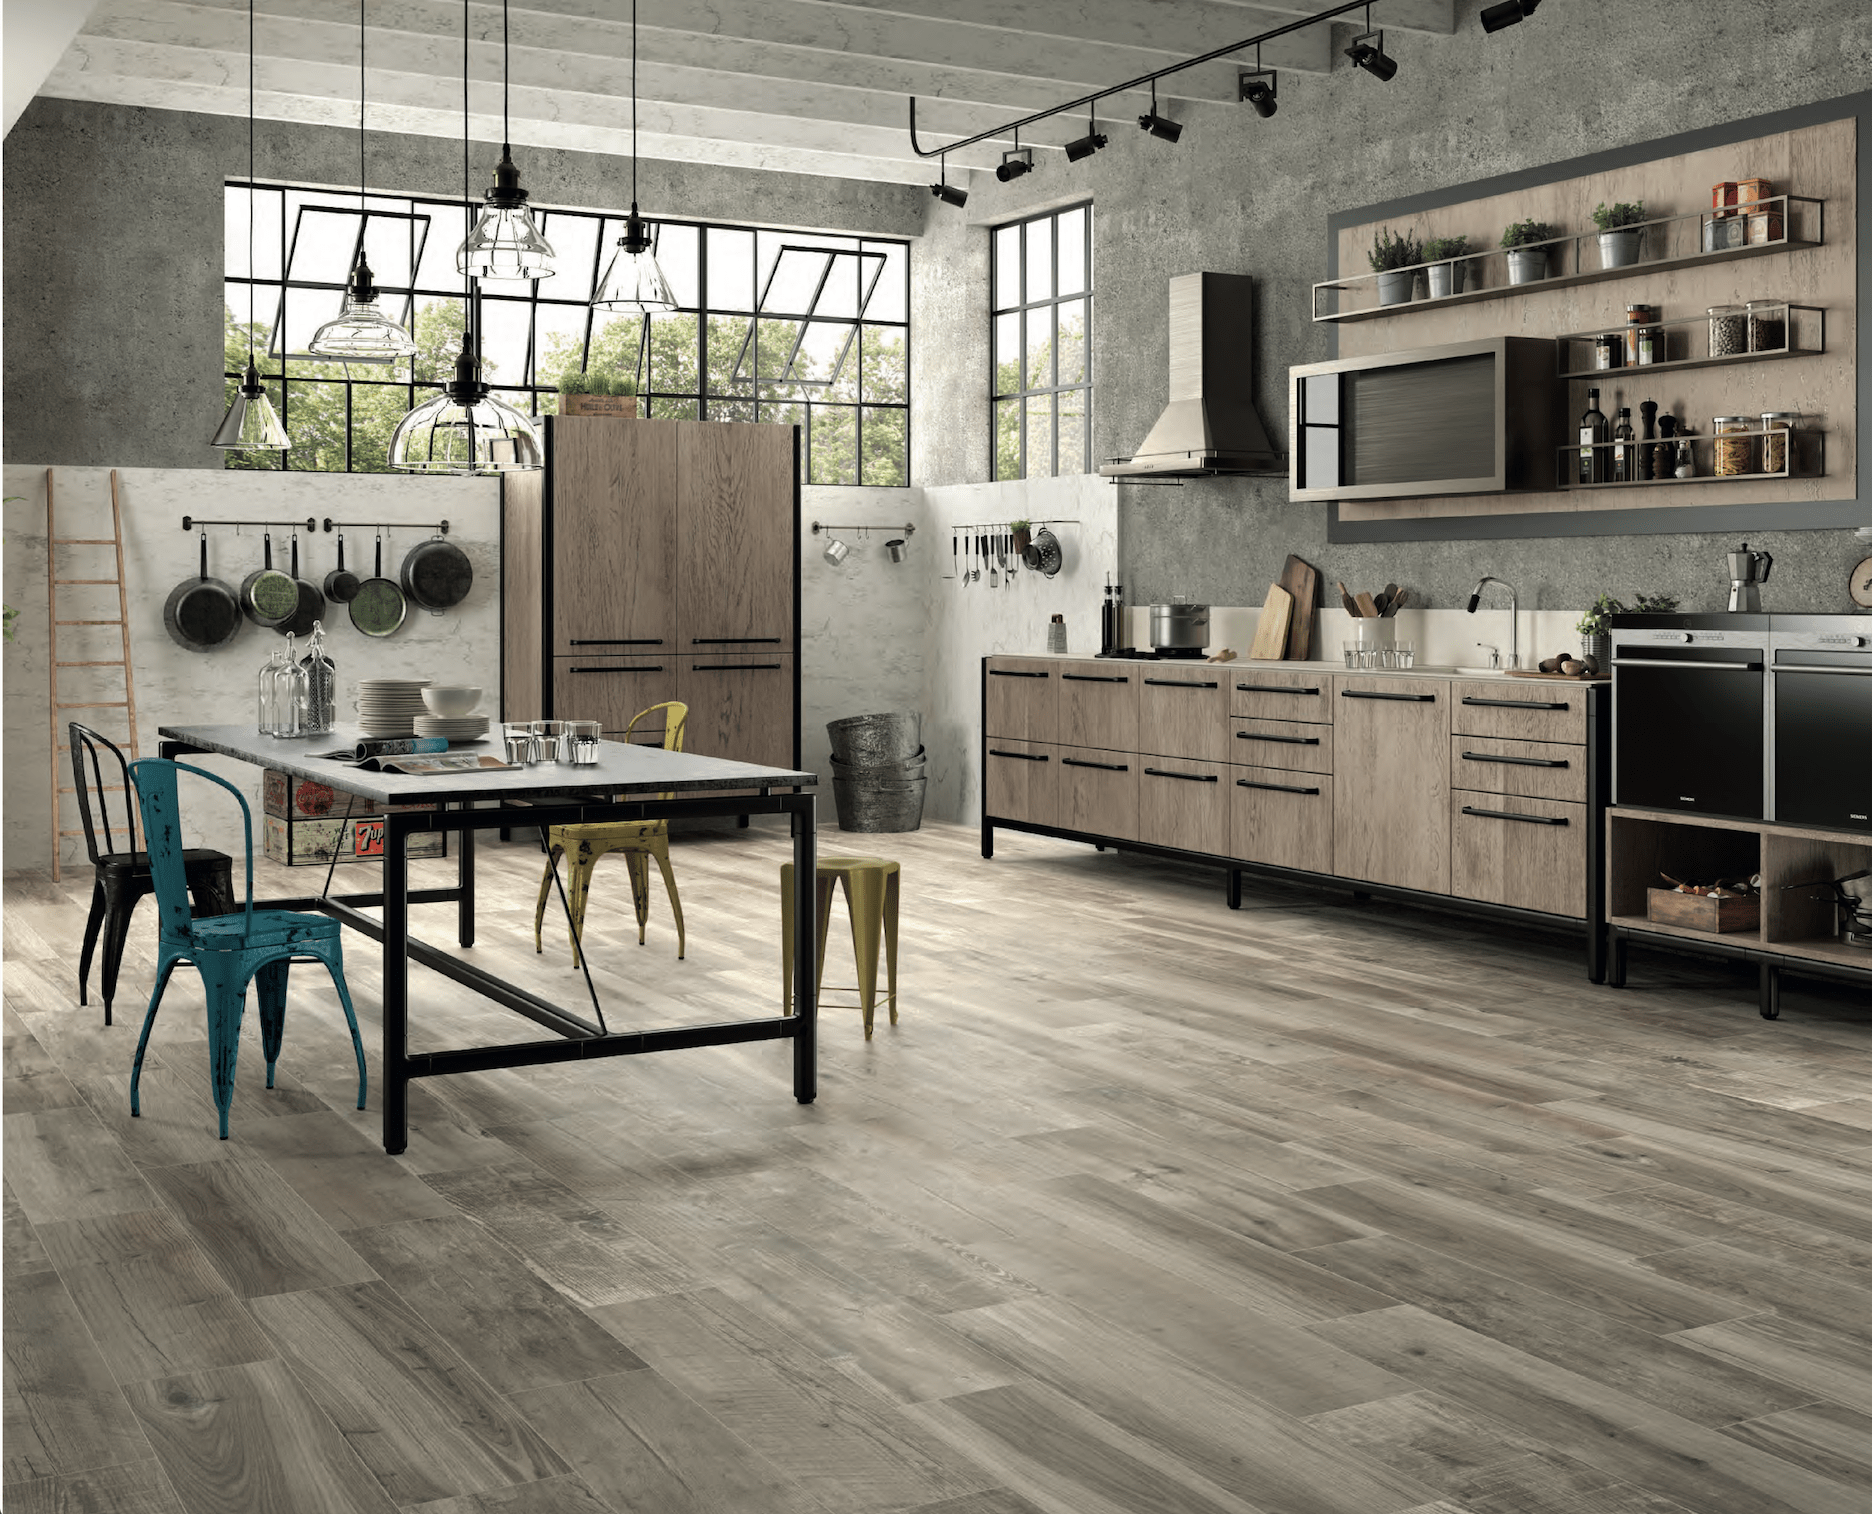 Vinyl Flooring vs. Tiles: The Pros and Cons of Both